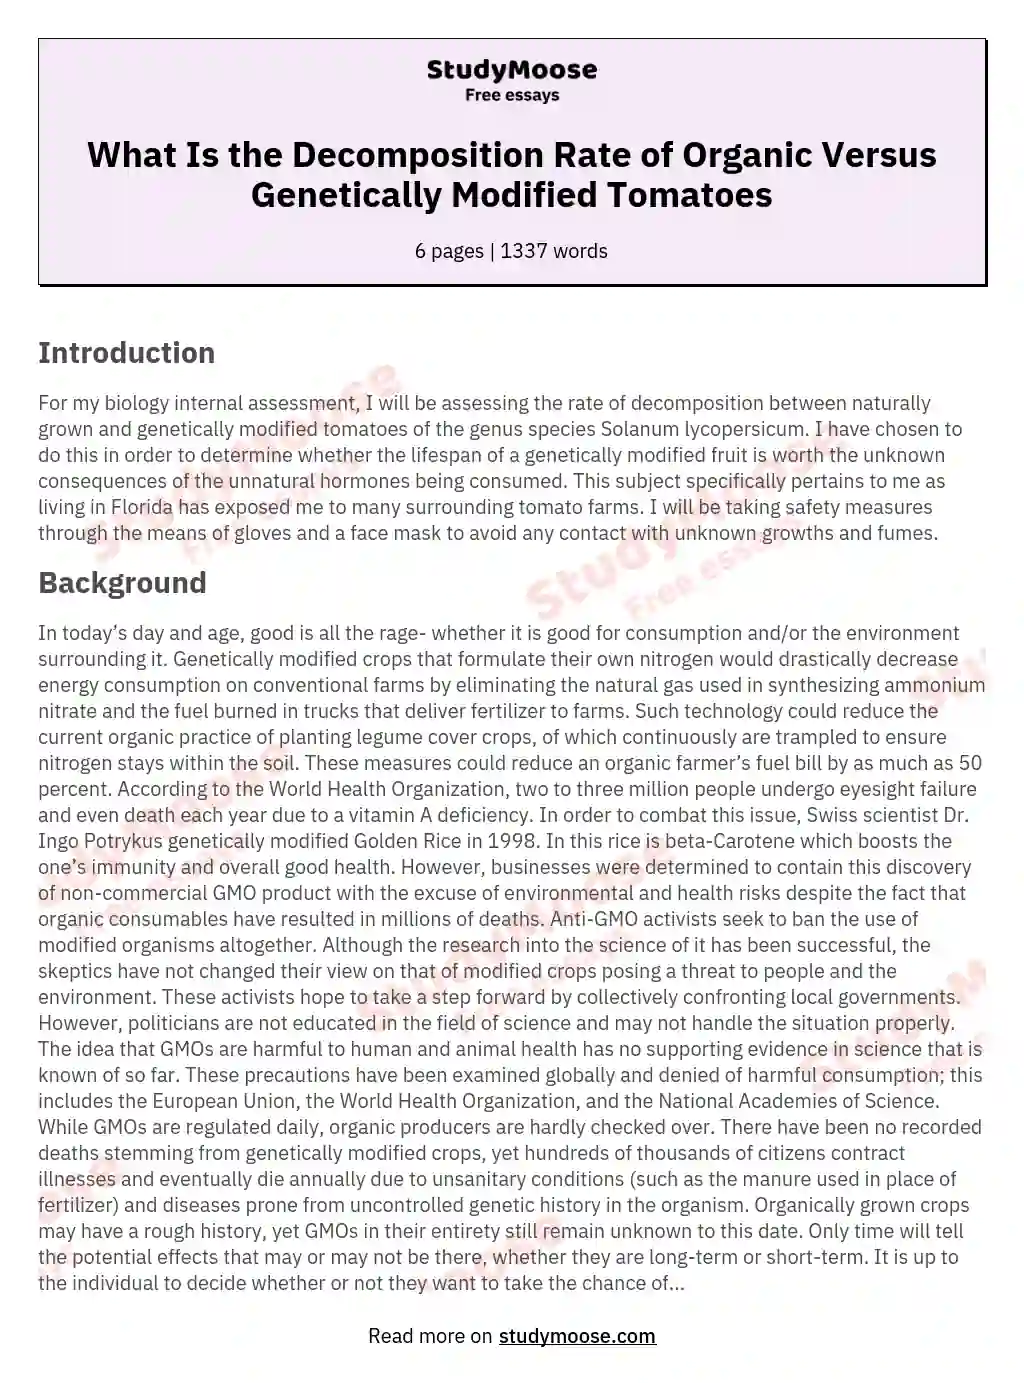 What Is the Decomposition Rate of Organic Versus Genetically Modified Tomatoes essay